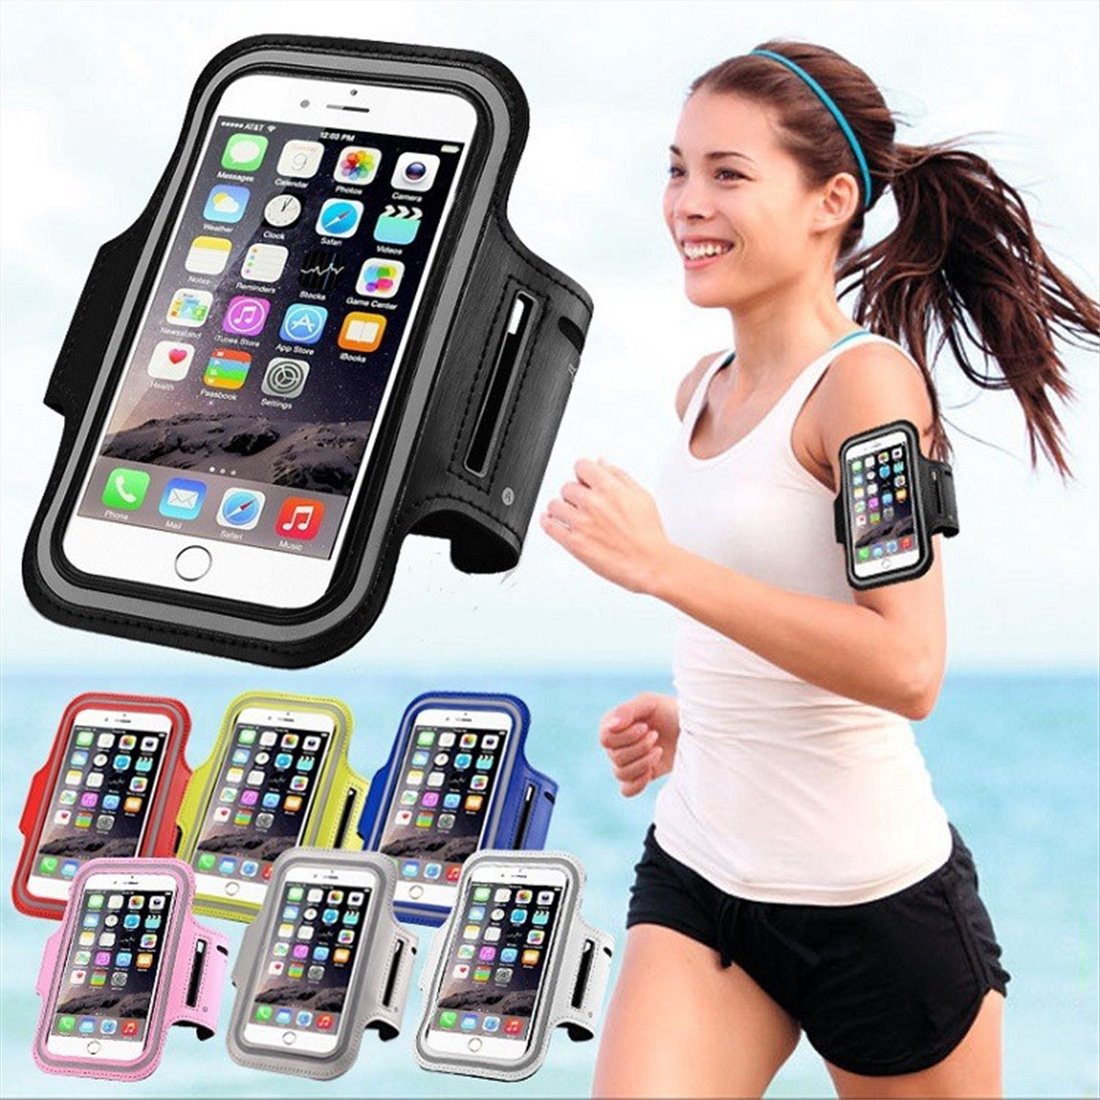 Universal 6.7 inch sports bracelet for mobile phone with Tranparent front - Blue